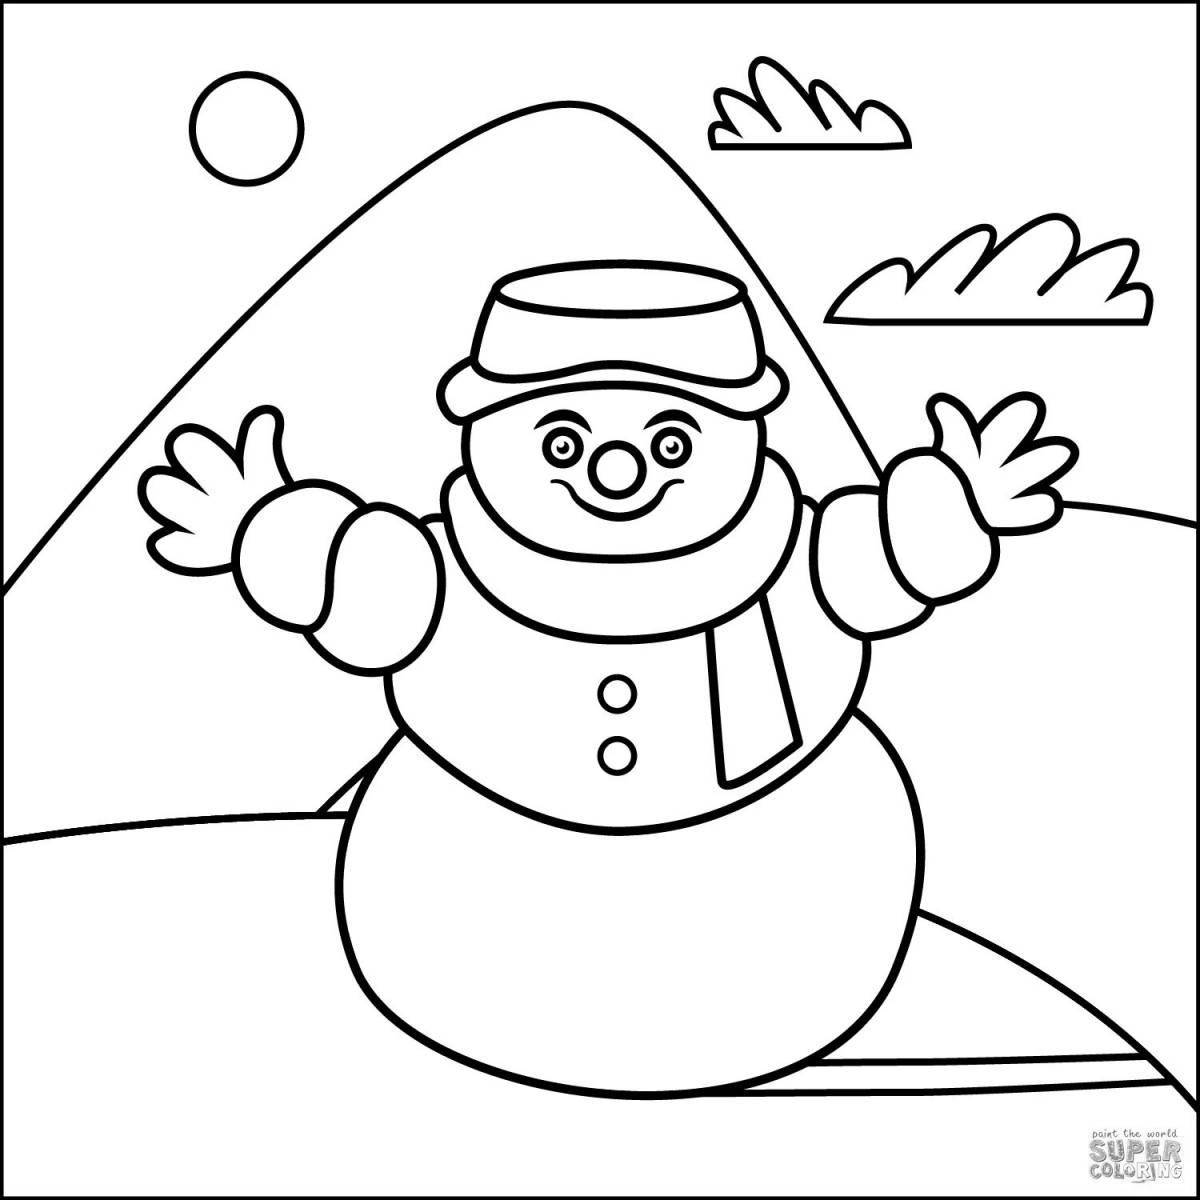 Colorful snowman coloring book for children 5 years old